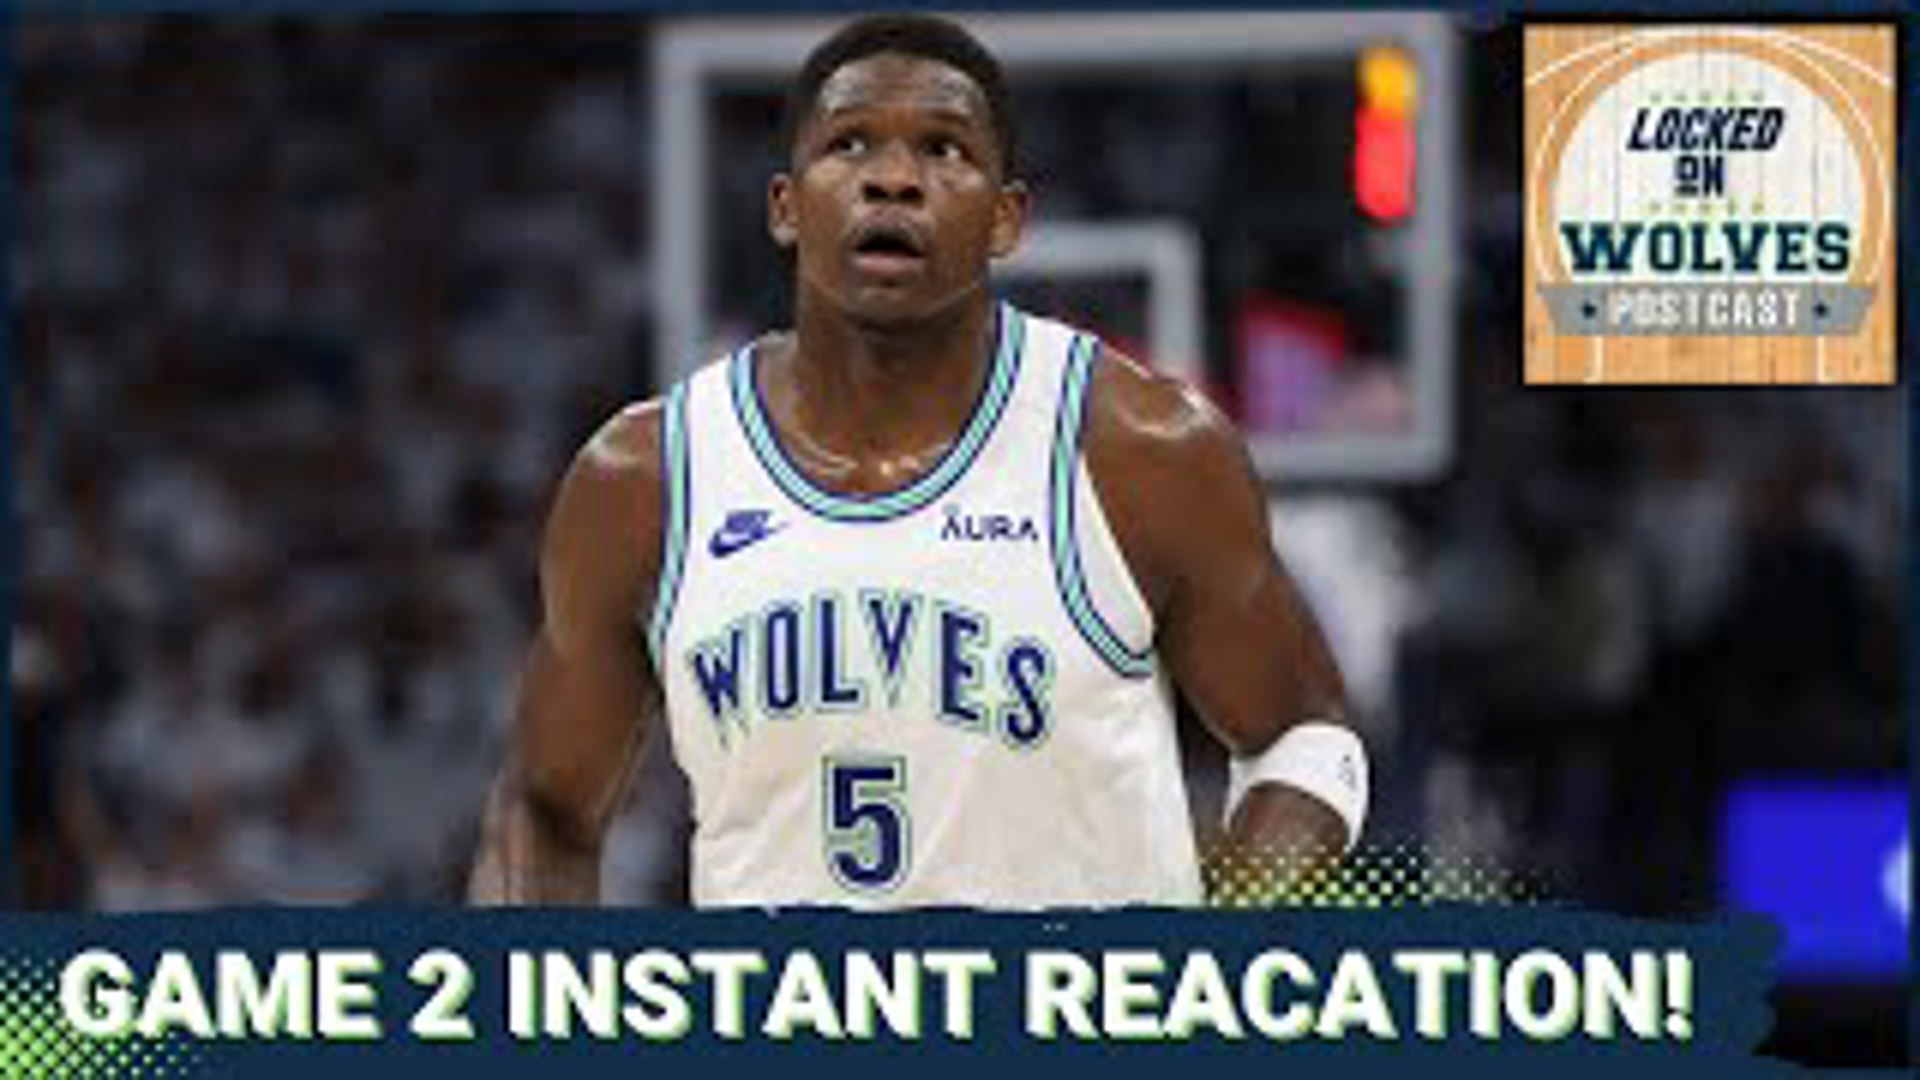 The Minnesota Timberwolves blew an 18-point lead as Luka Doncic and the Dallas Mavericks steal game two. Join Luke Inman and Sam Ekstrom for the breakdown!